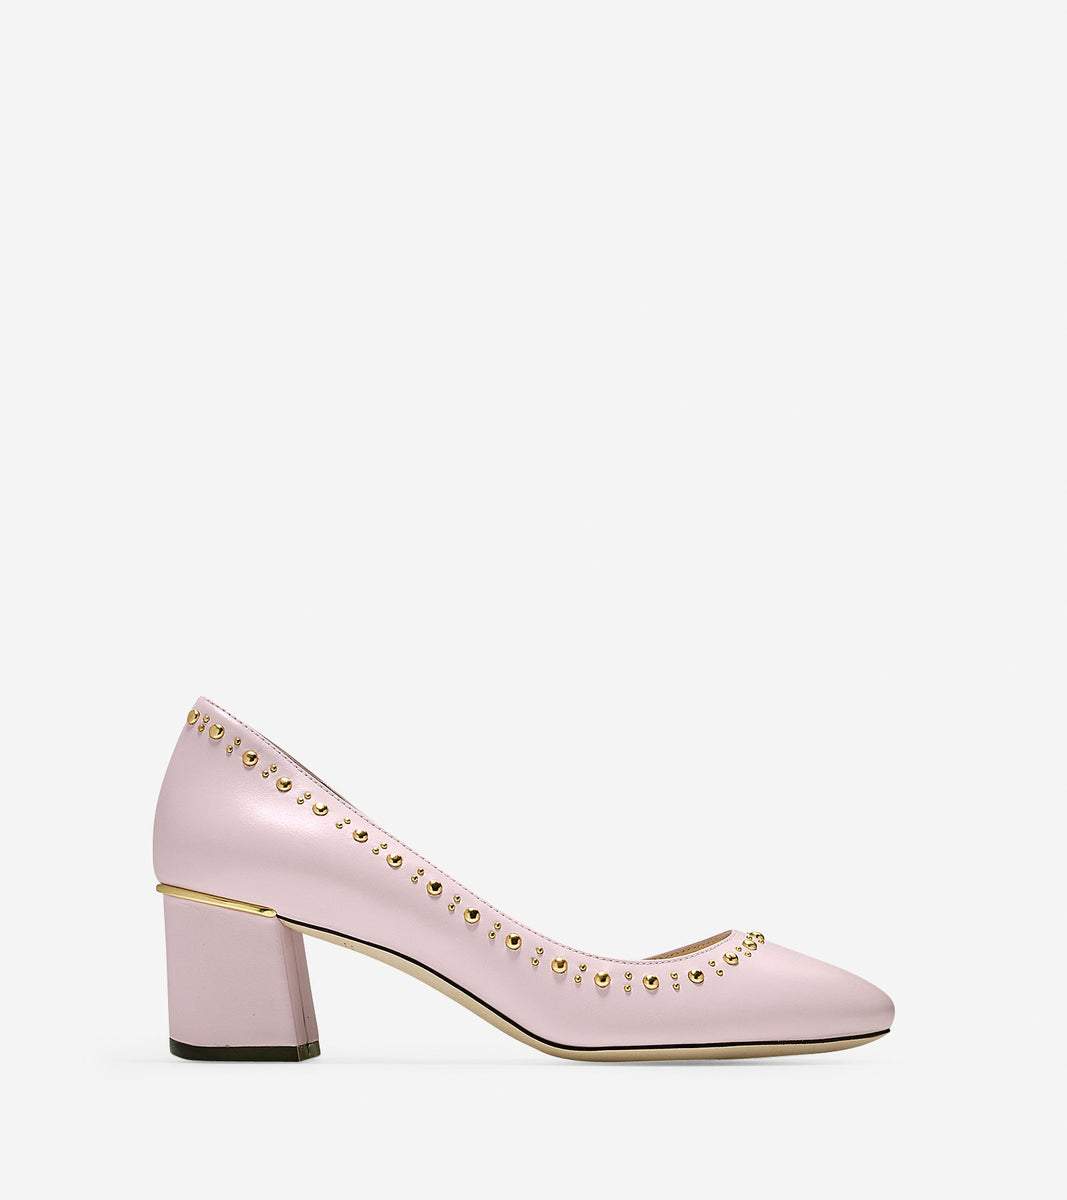 ColeHaan-Laree Grand Stud Pump (55mm)-w09592-Pale Lilac Leather